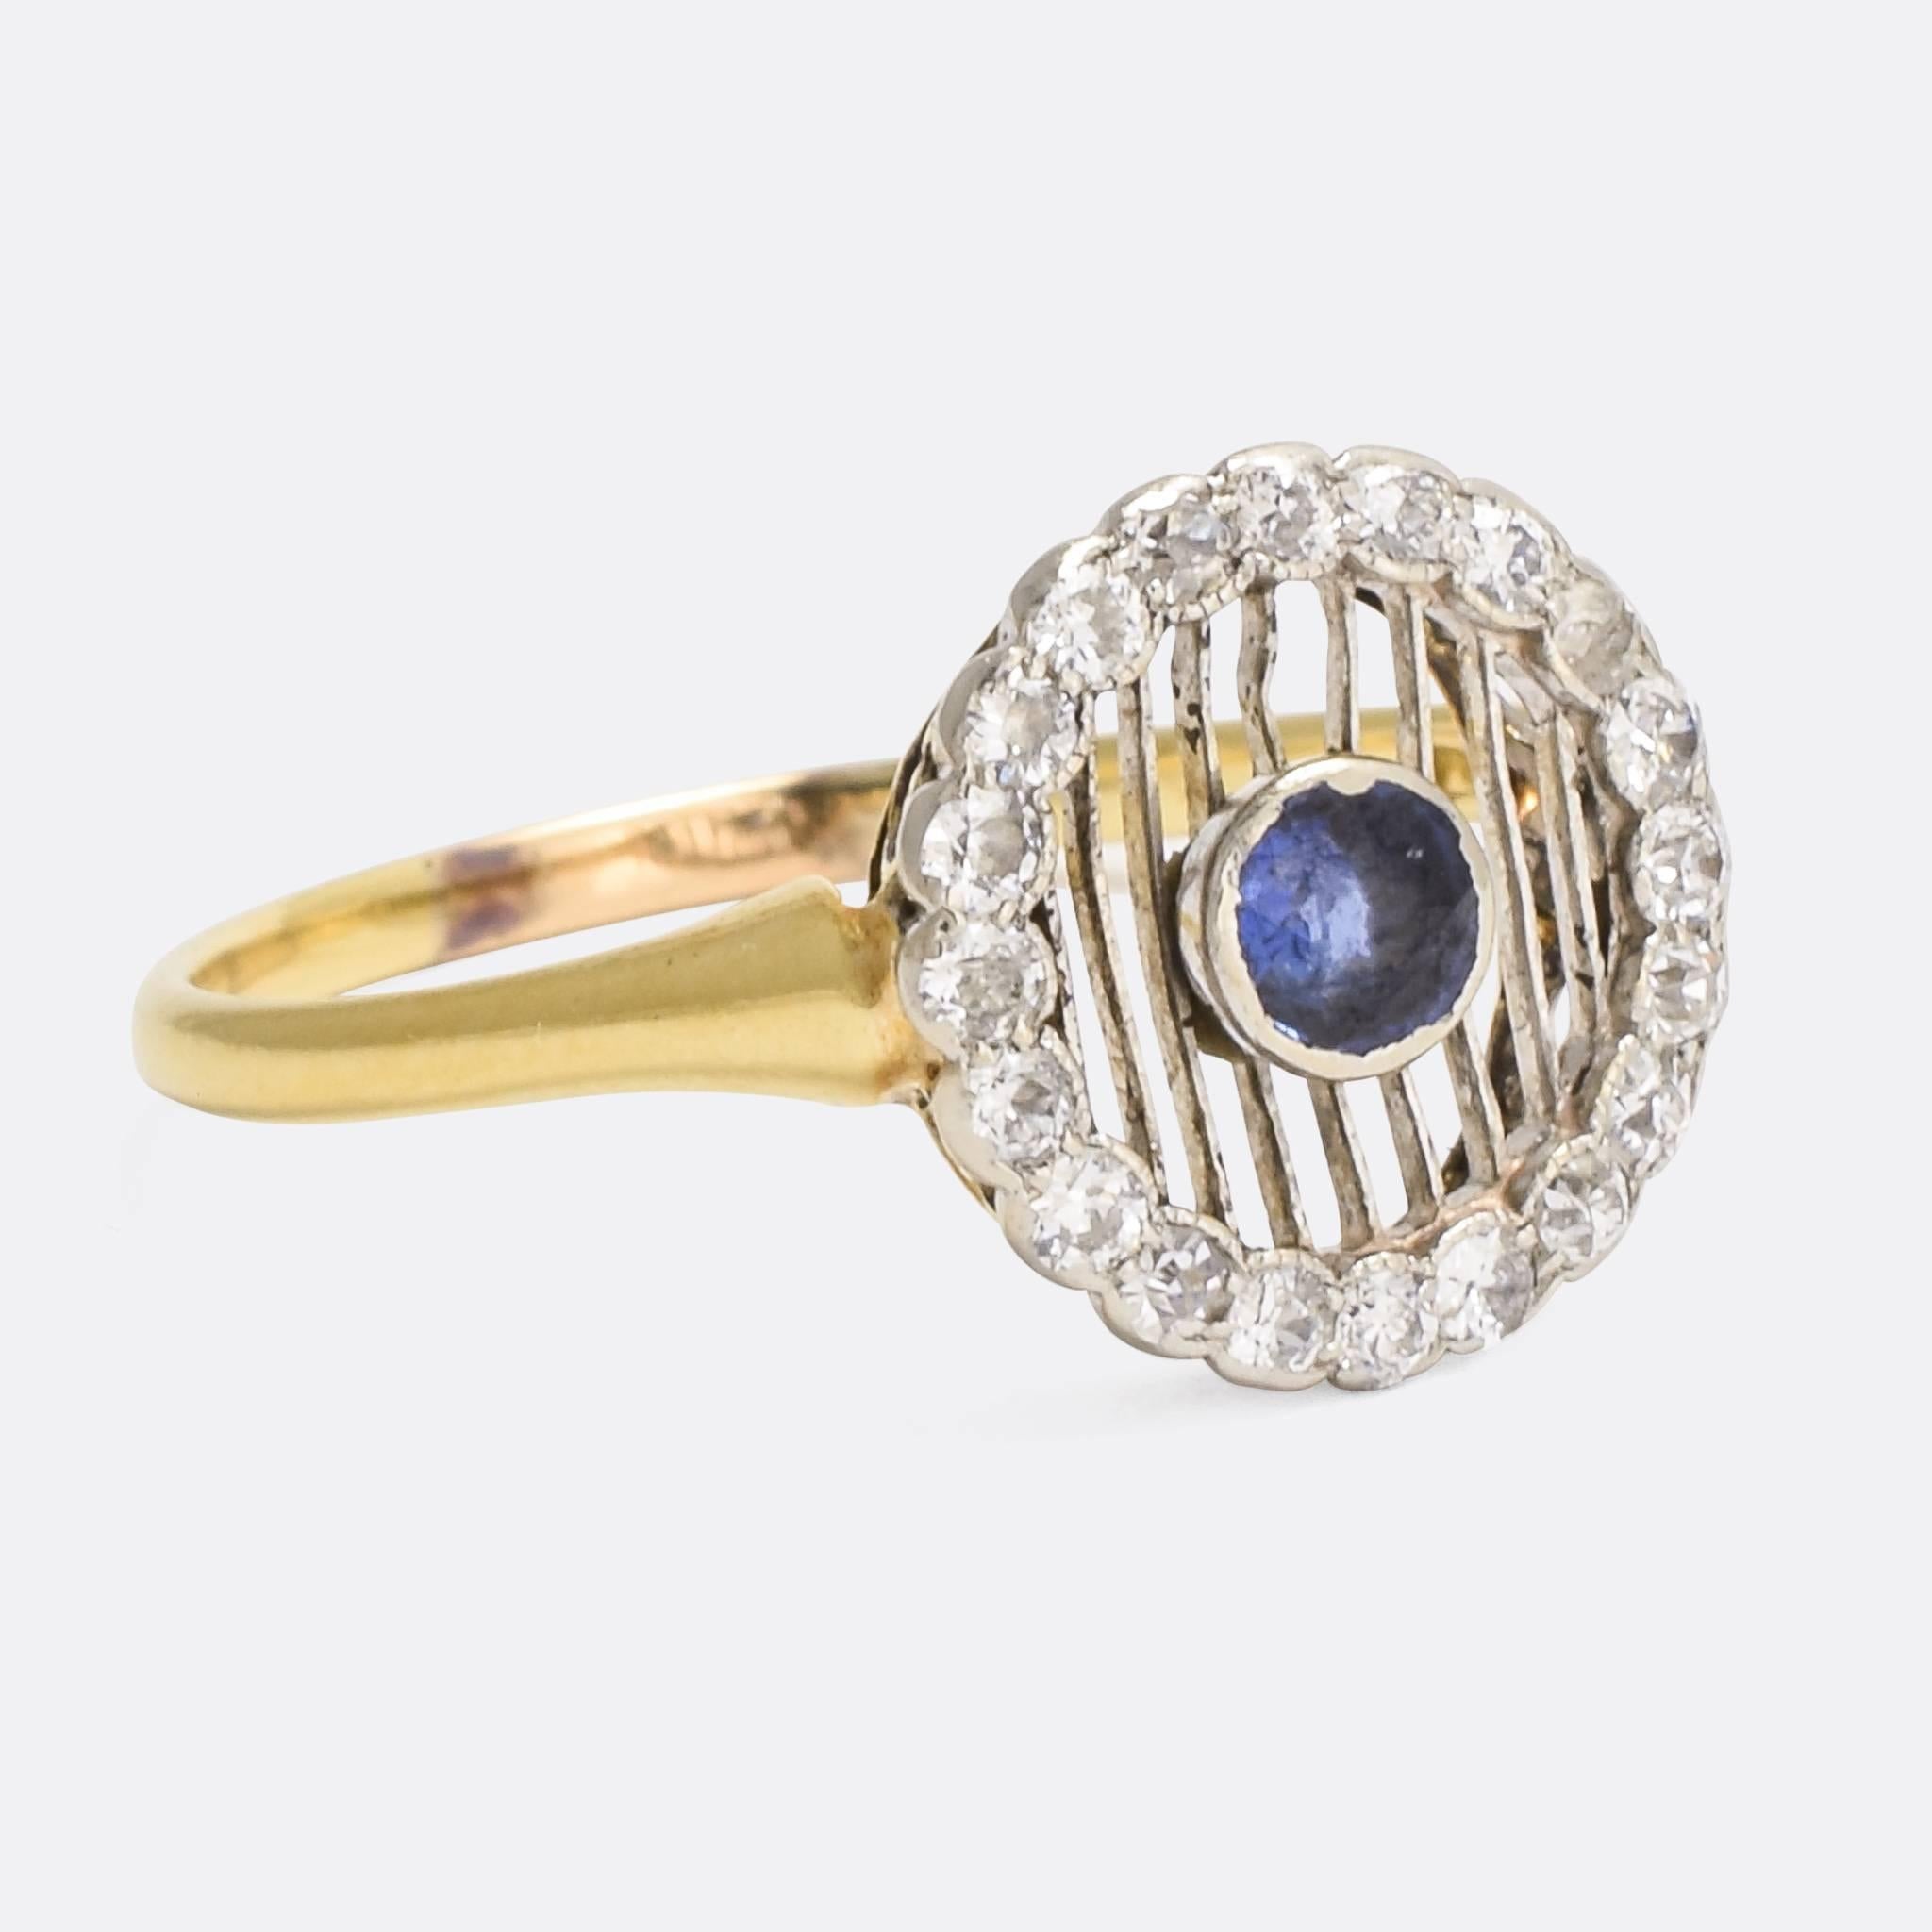 A stylish antique halo ring, set with a central blue sapphire and a cluster of old cut diamonds. The sapphire is suspended on ultra-thin platinum bars, and unusual but very cool design. It dates from the Edwardian era, crafted in 18 karat gold and